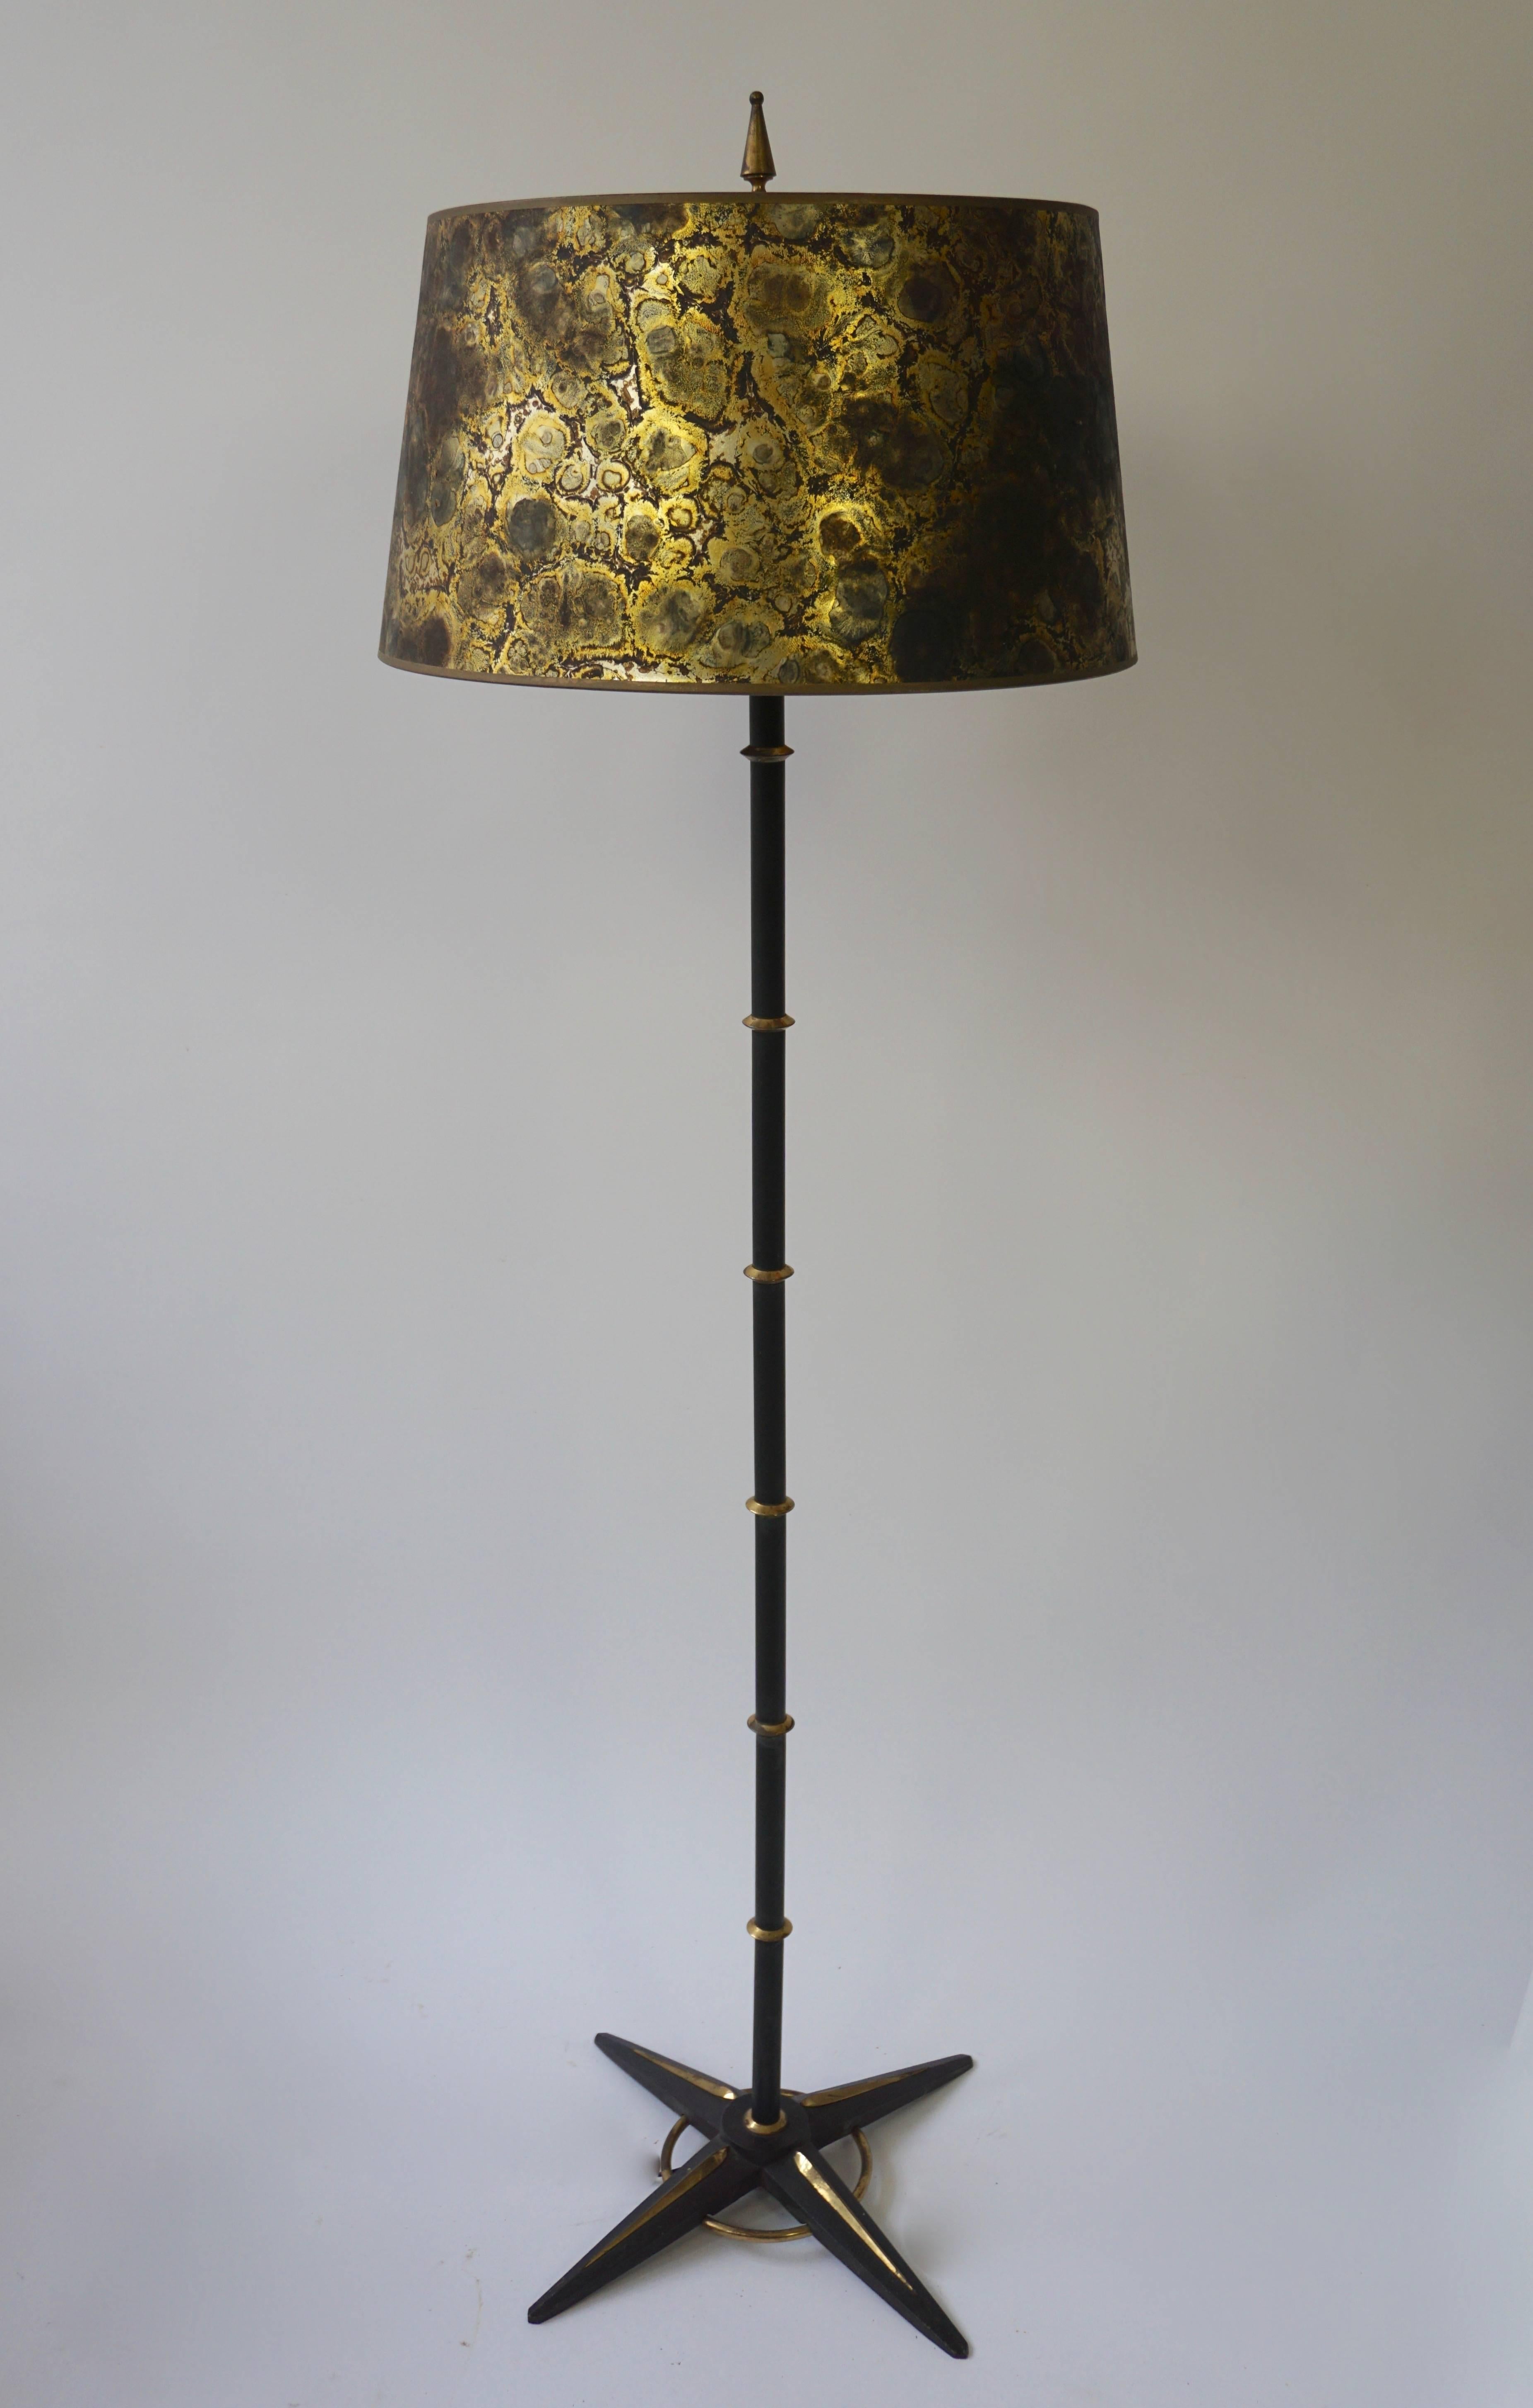 Beautiful 1950s black metal and brass floor lamp with gold colored shade.
Measures: Height with shade 140 cm.
Diameter shade 43 cm.
Height shade 35 cm.